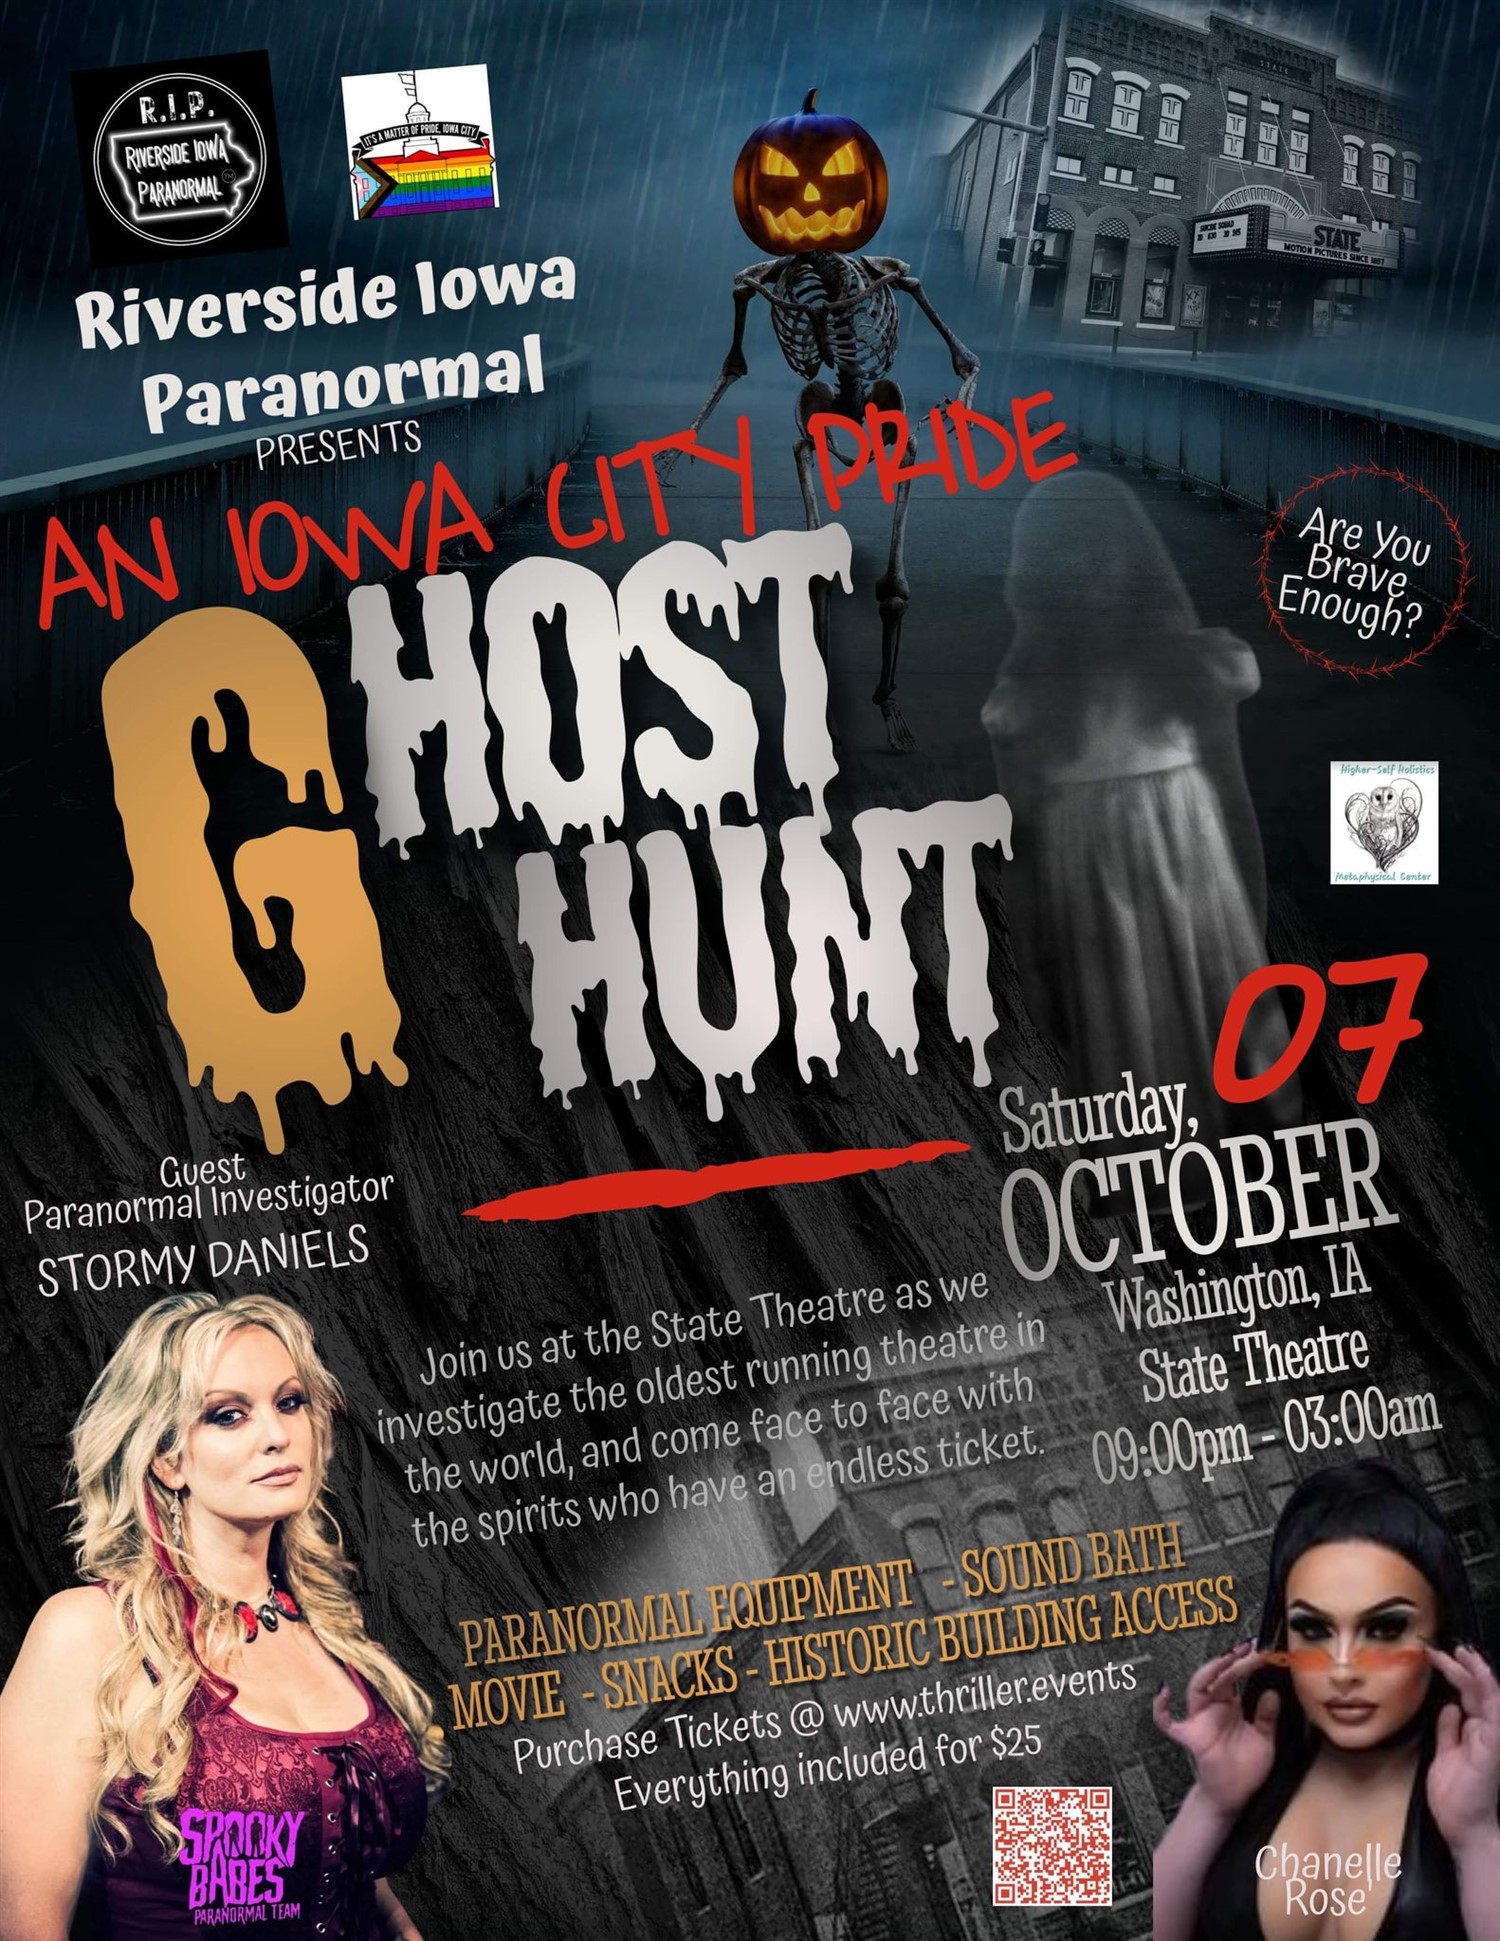 Iowa City Pride Ghost Hunt  on Oct 07, 21:00@State Theatre - Buy tickets and Get information on Thriller Events thriller.events